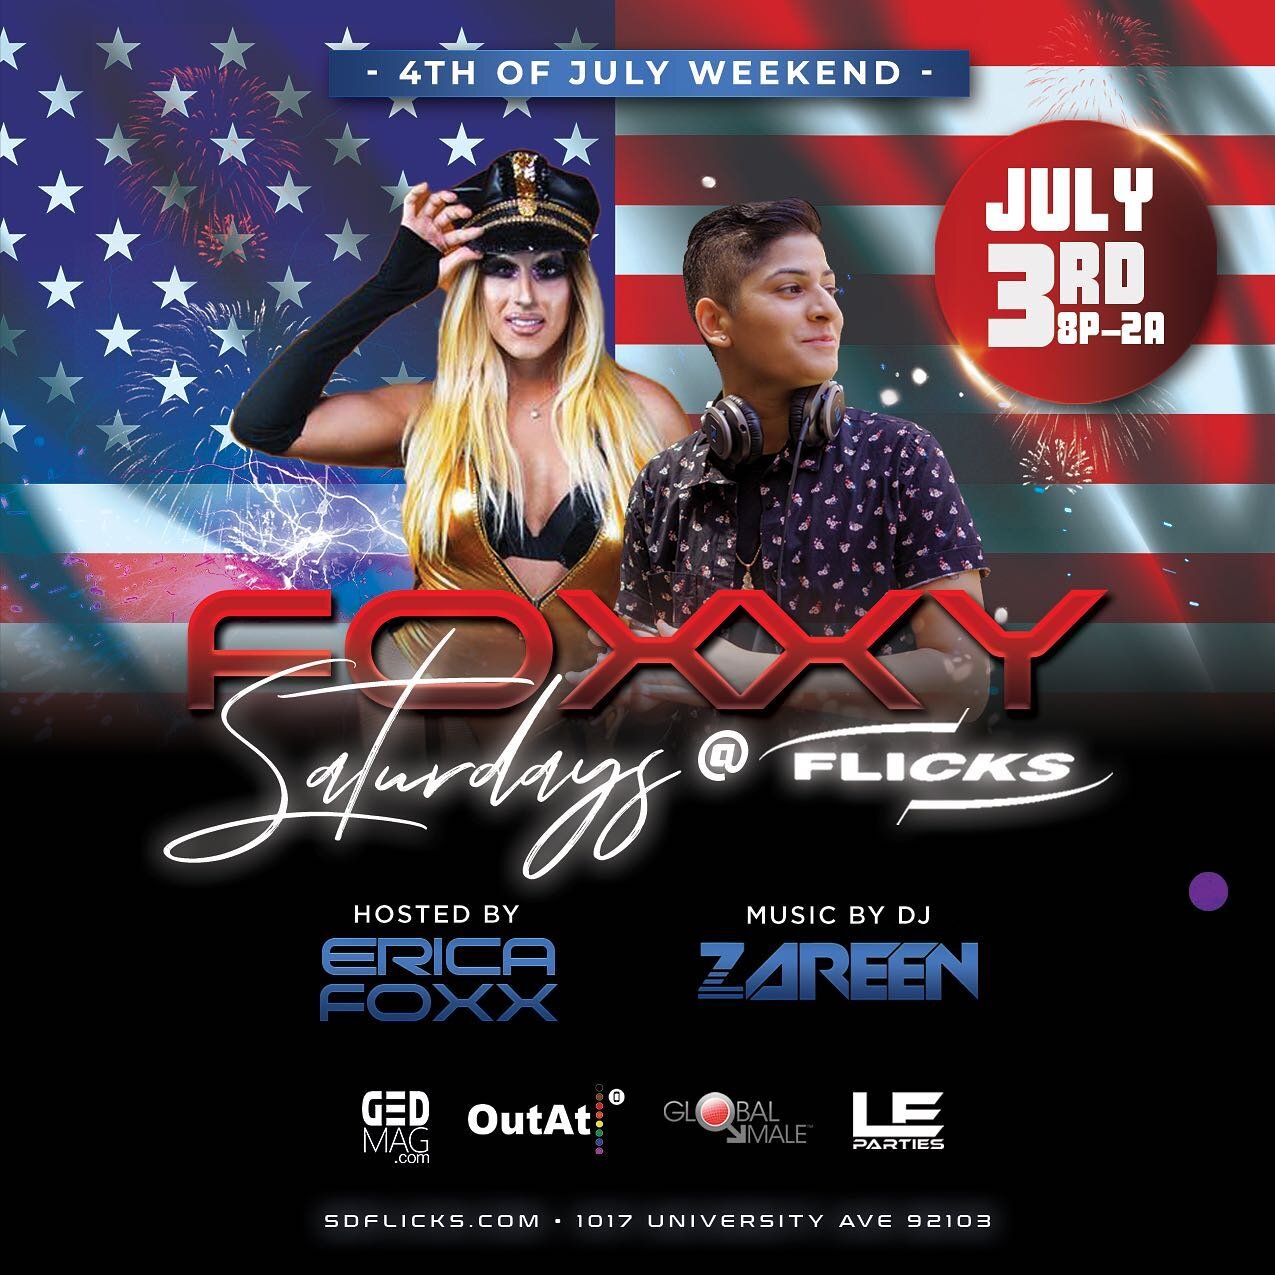 4th of July weekend is poppin&rsquo; in Hillcrest! 💯 See you TONIGHT at @flicks_sd with your host @team_ericafoxx. Performers throughout the night‼️
&bull;&bull;&bull;
Sunday: 

WOMAN UP is back at @gossipgrill_ 🌈 3-7PM‼️hosted by @yourmomkevi 🥳

